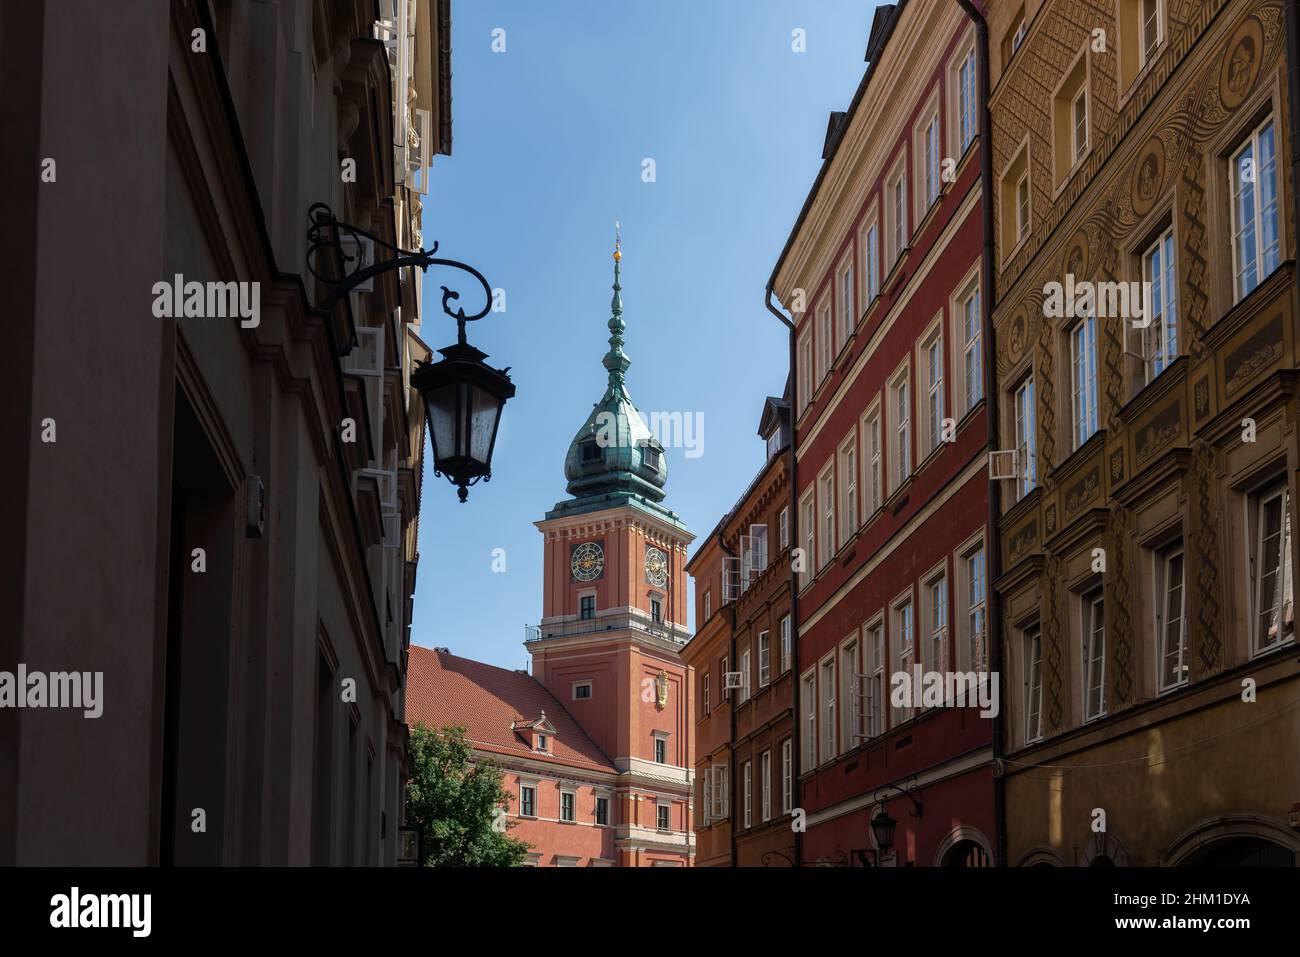 Warsaw Royal Castle at Old Town - Warsaw, Poland Stock Photo